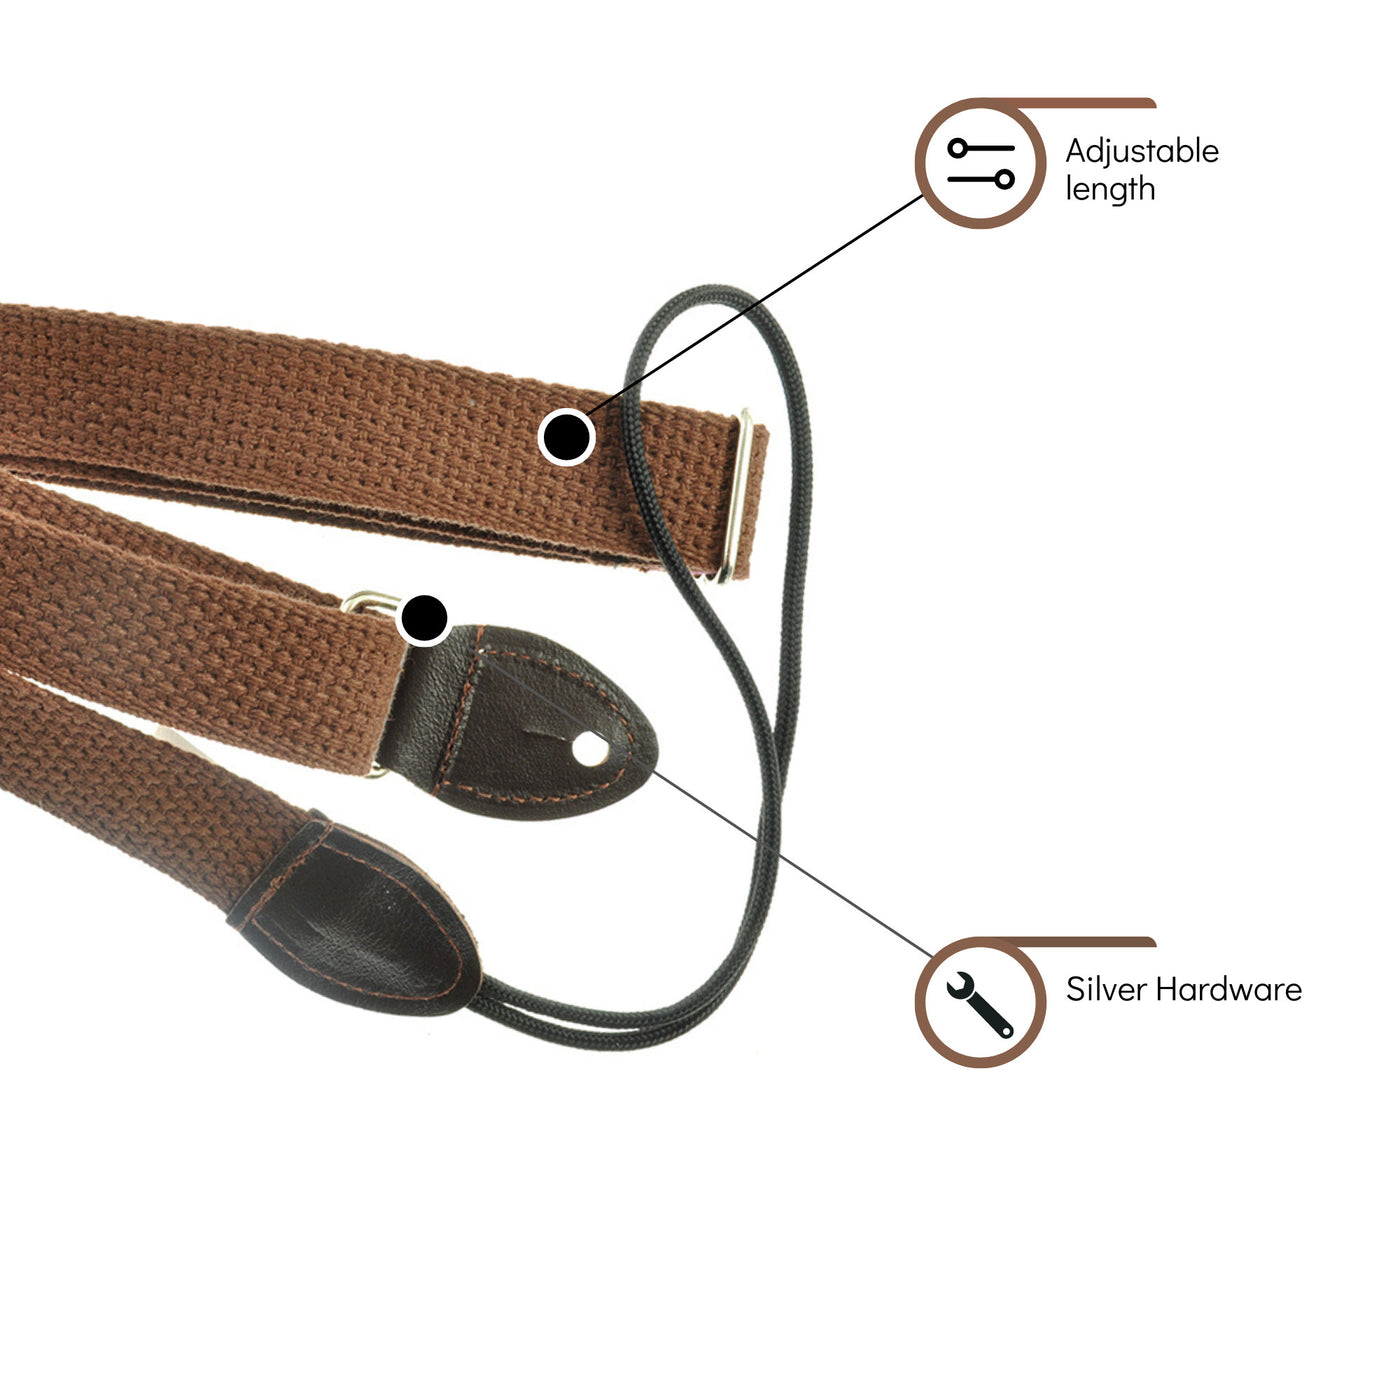 Souldier FMDA0000BR04DB - Handmade Souldier Fabric F-Style Mandolin Straps, 1 Inch Width and Adjustable Length, Brown